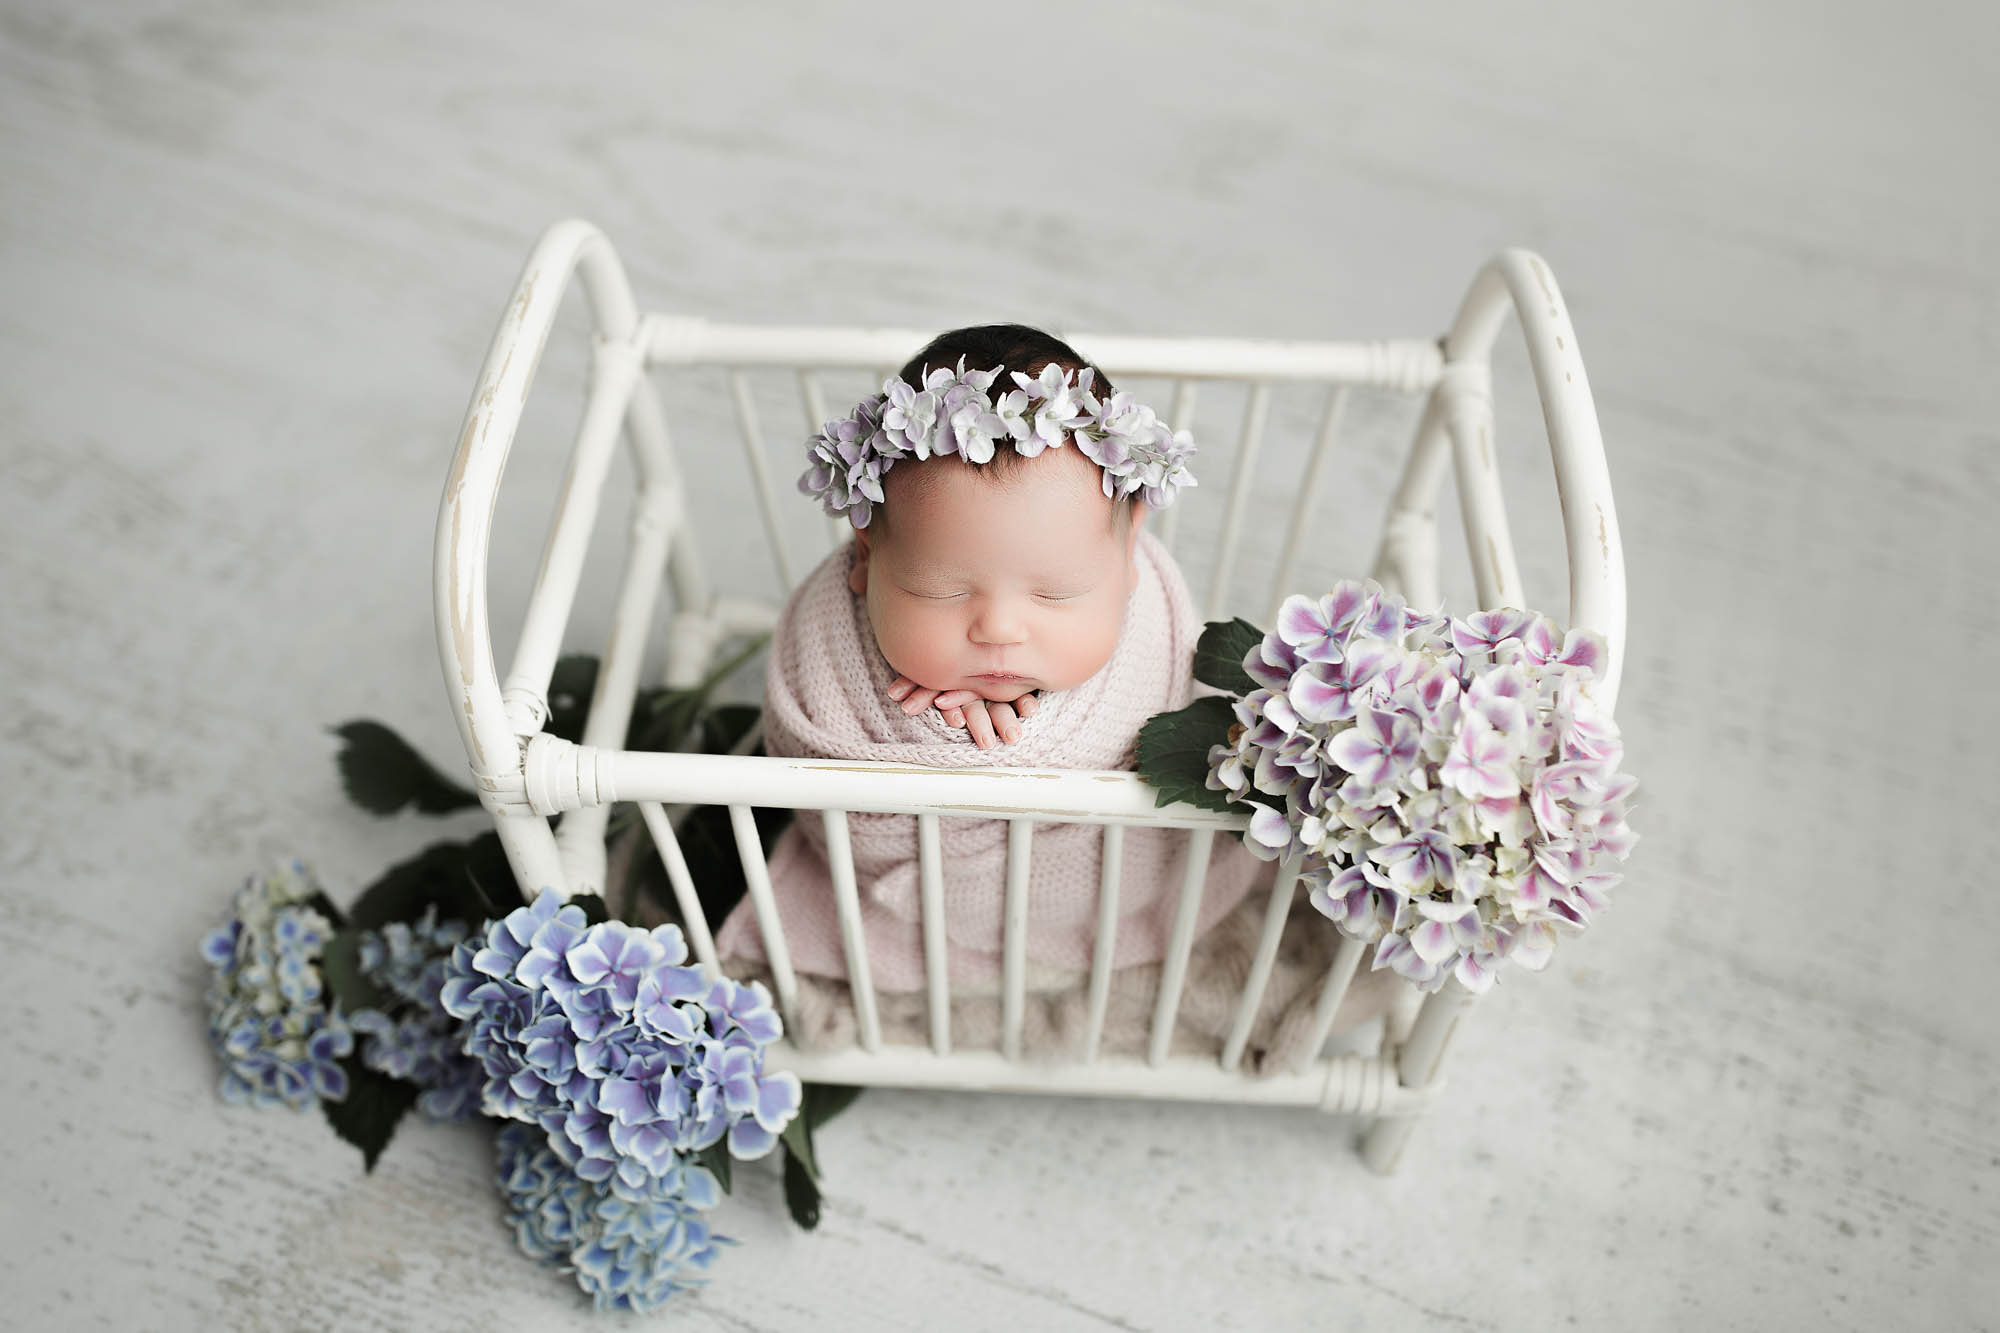 Saren Cassotto Canton Newborn Photographer photo of newborn baby girl in miniature crib with a floral crown and surrounded by flowers in potato sack pose